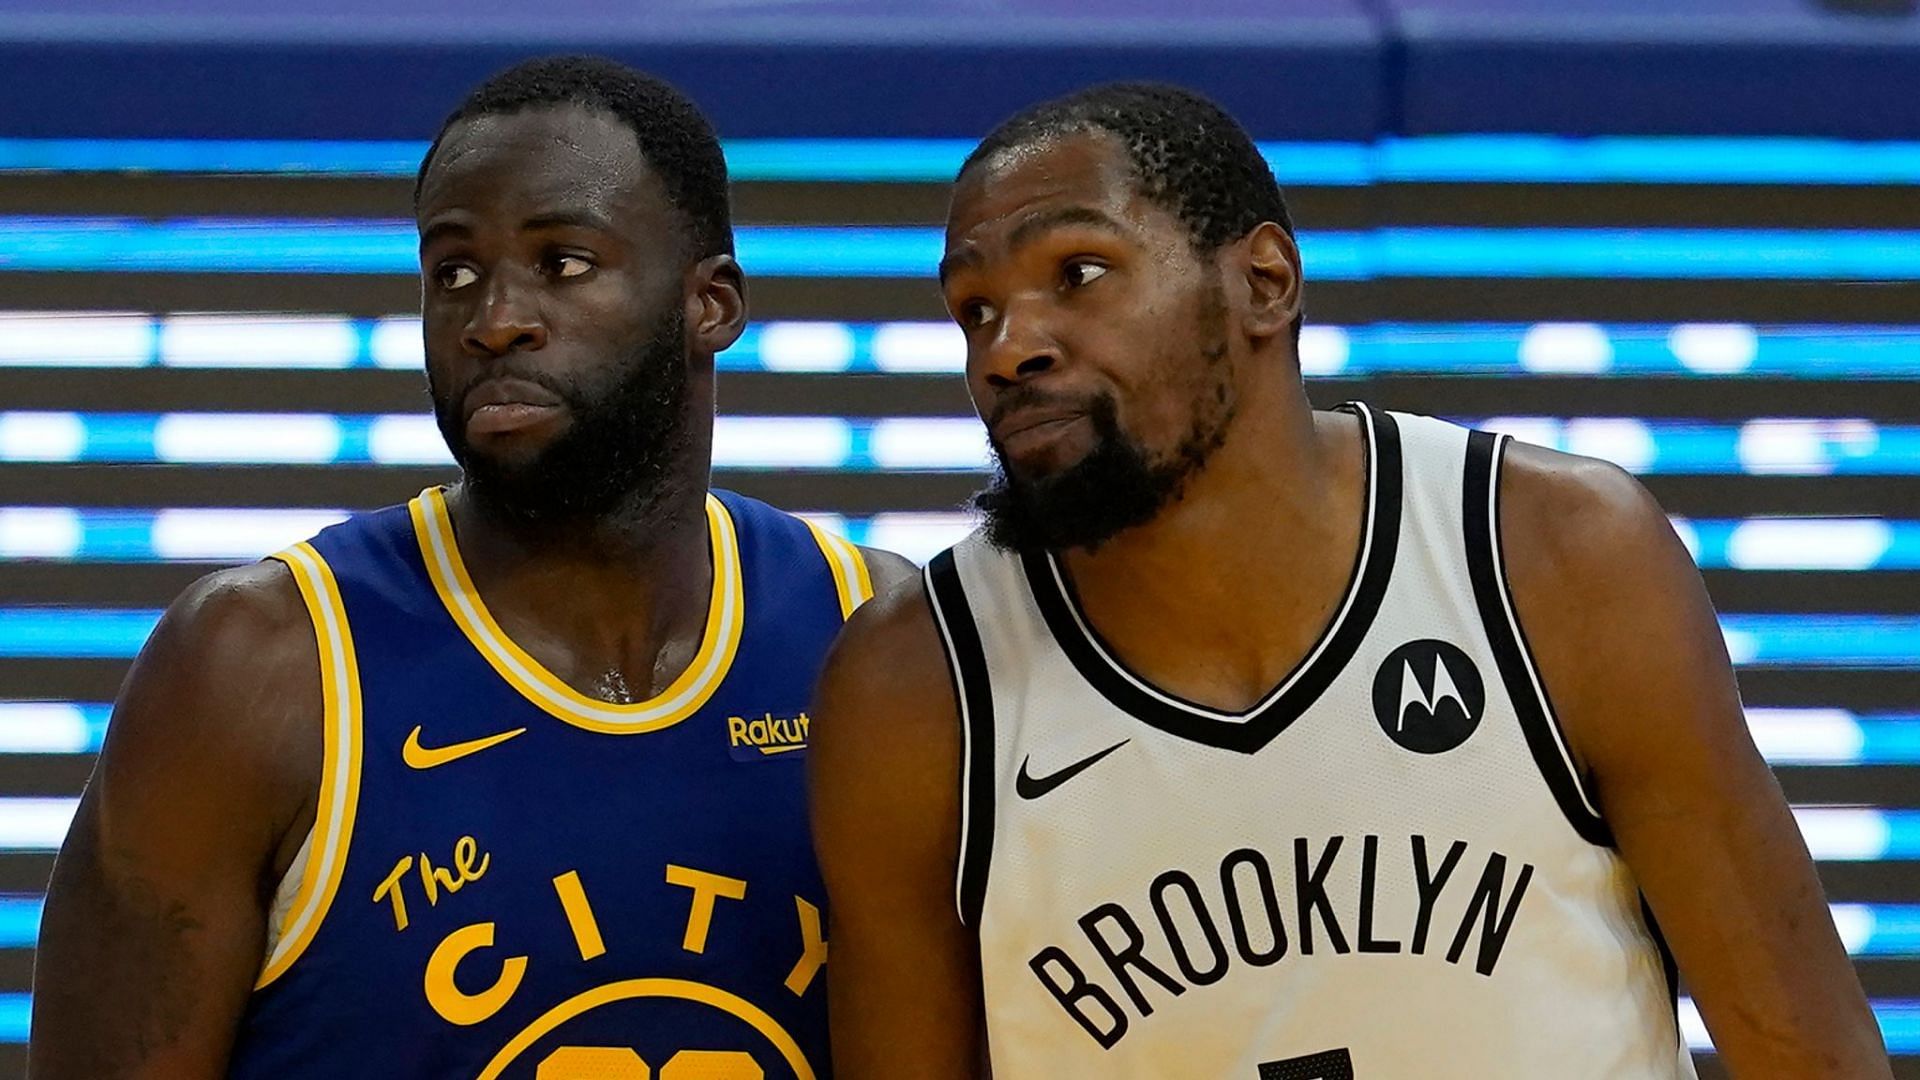 Kevin Durant versus Draymond Green will be one of the biggest subplots if they meet in the NBA Finals this season. [Photo: Sky Sports]